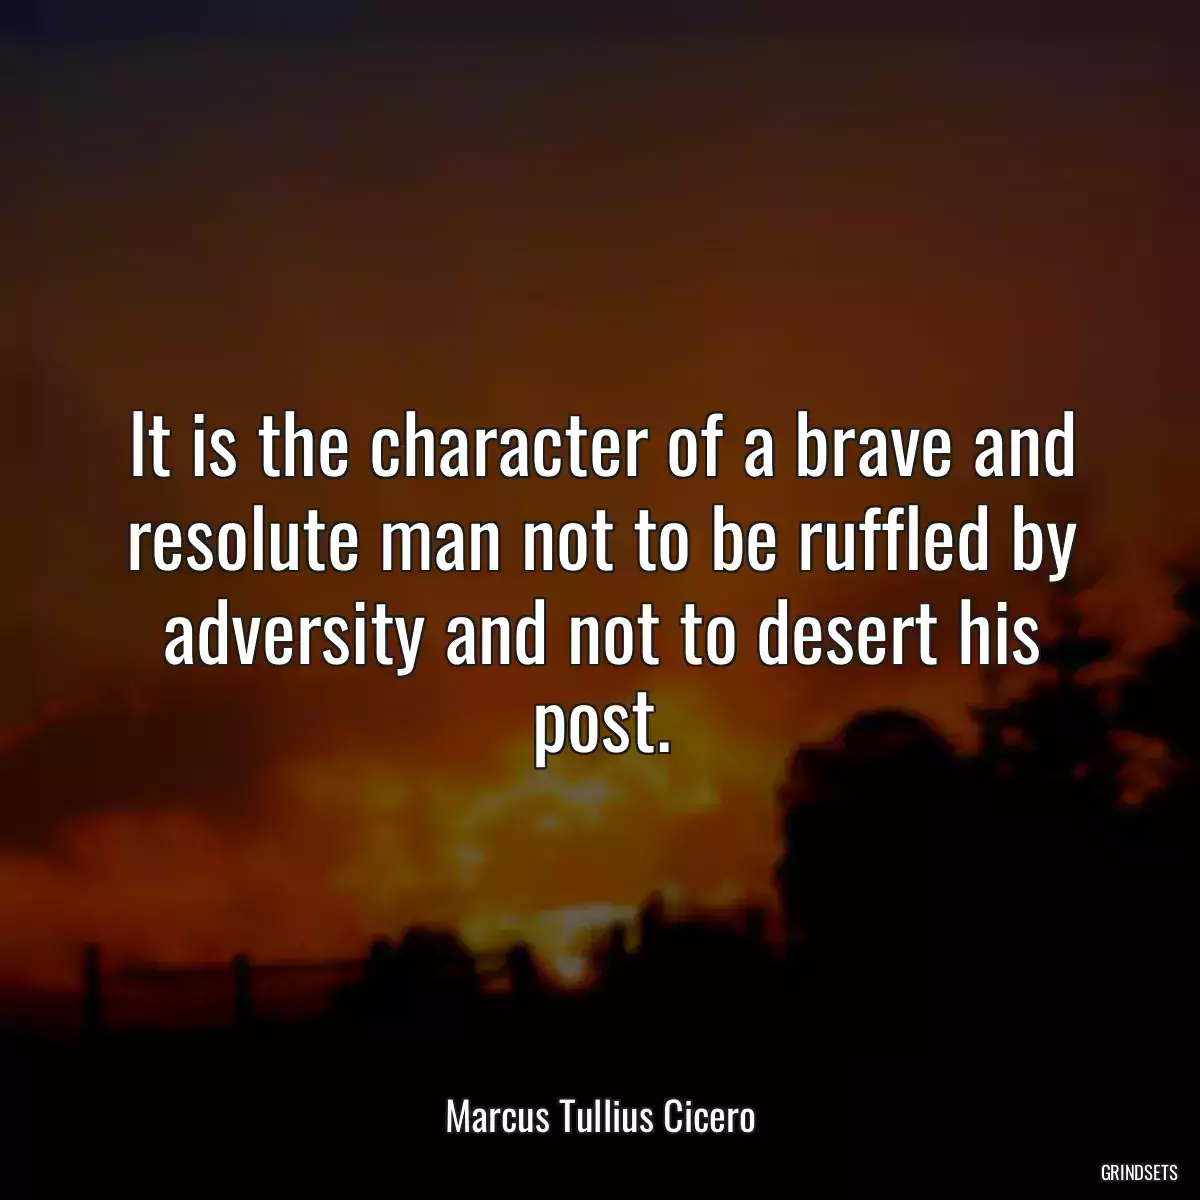 It is the character of a brave and resolute man not to be ruffled by adversity and not to desert his post.